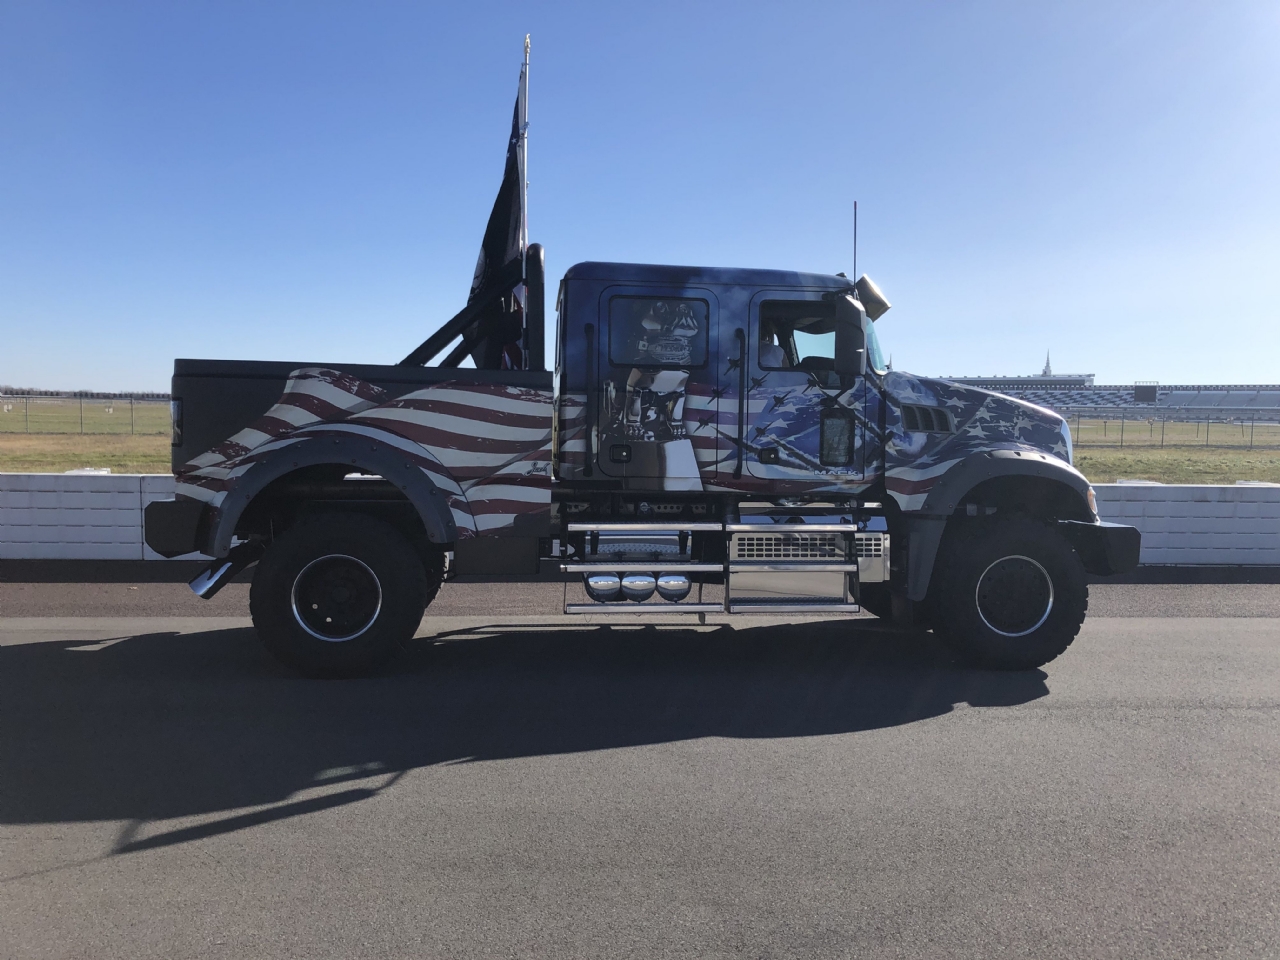 Mack Truck at the Monroe County Veterans Day Parade held on Nov 8th at Pocono Speedway 